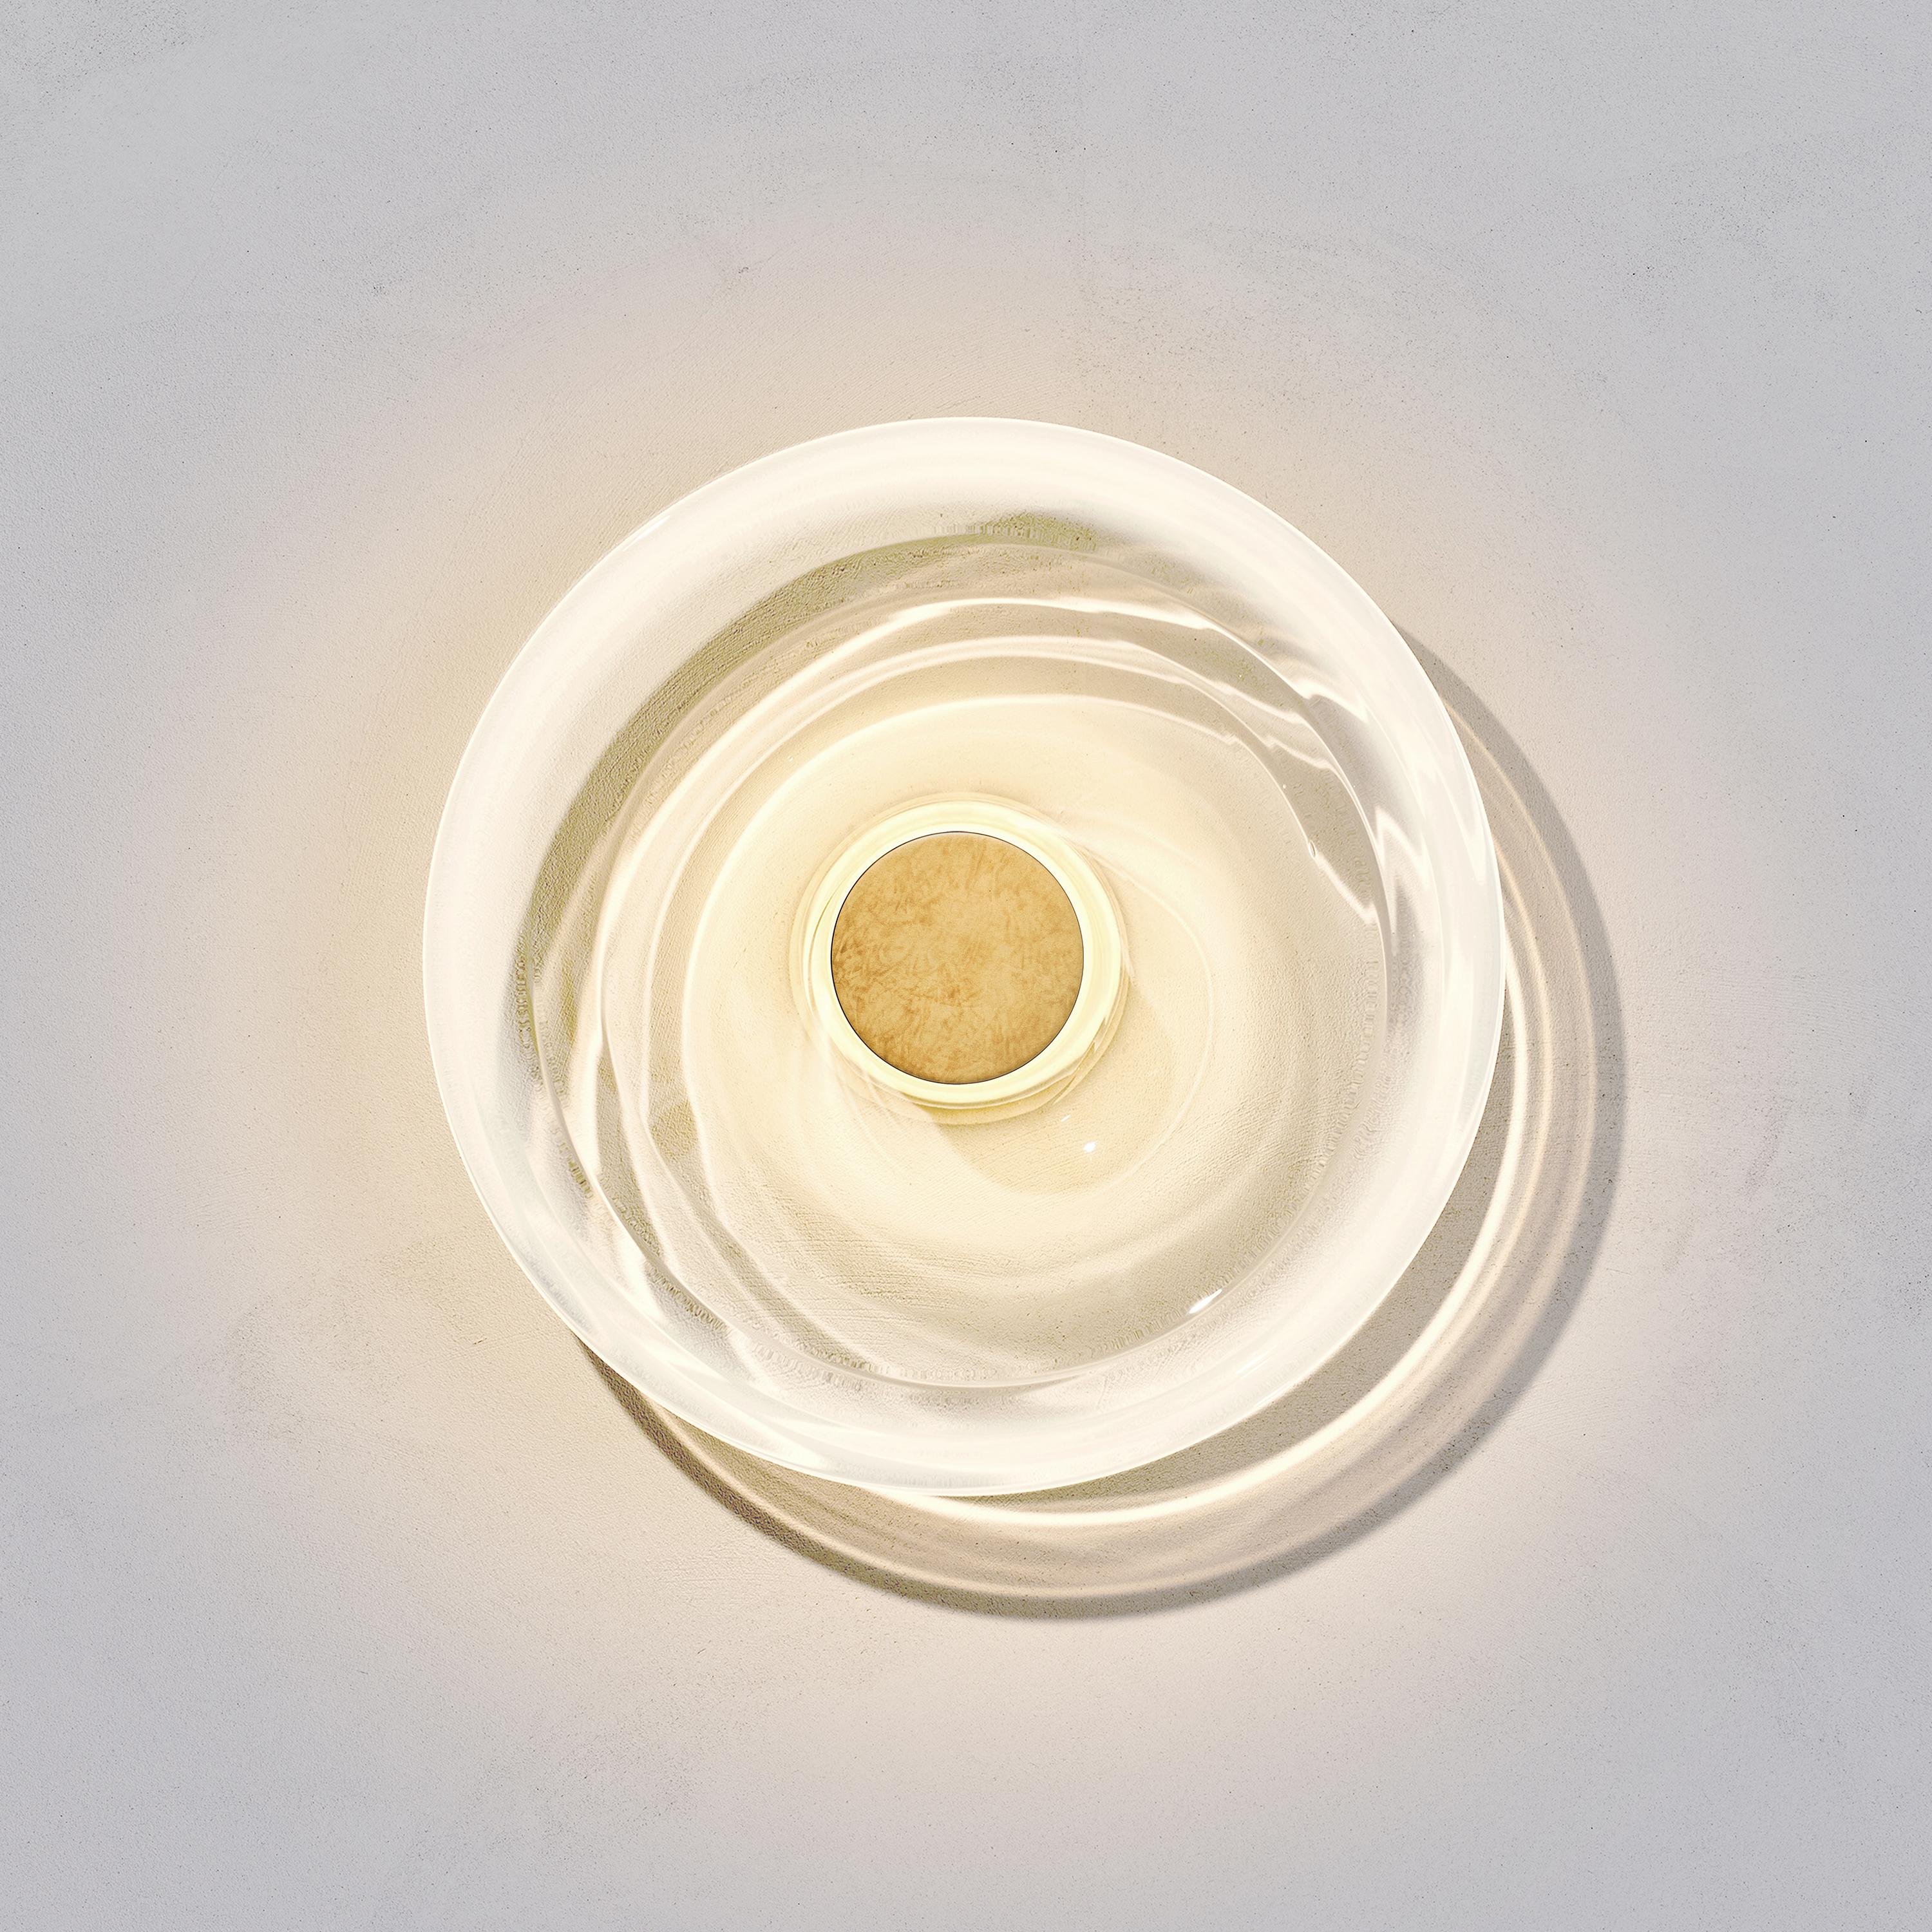 Liquid Alabaster wall light is designed by international illumination artist Eva Menz. Inspired by the circular ripples and reflections created on water, the white gradient glass is transformed into a beautiful sculptural sconce.

Each piece is